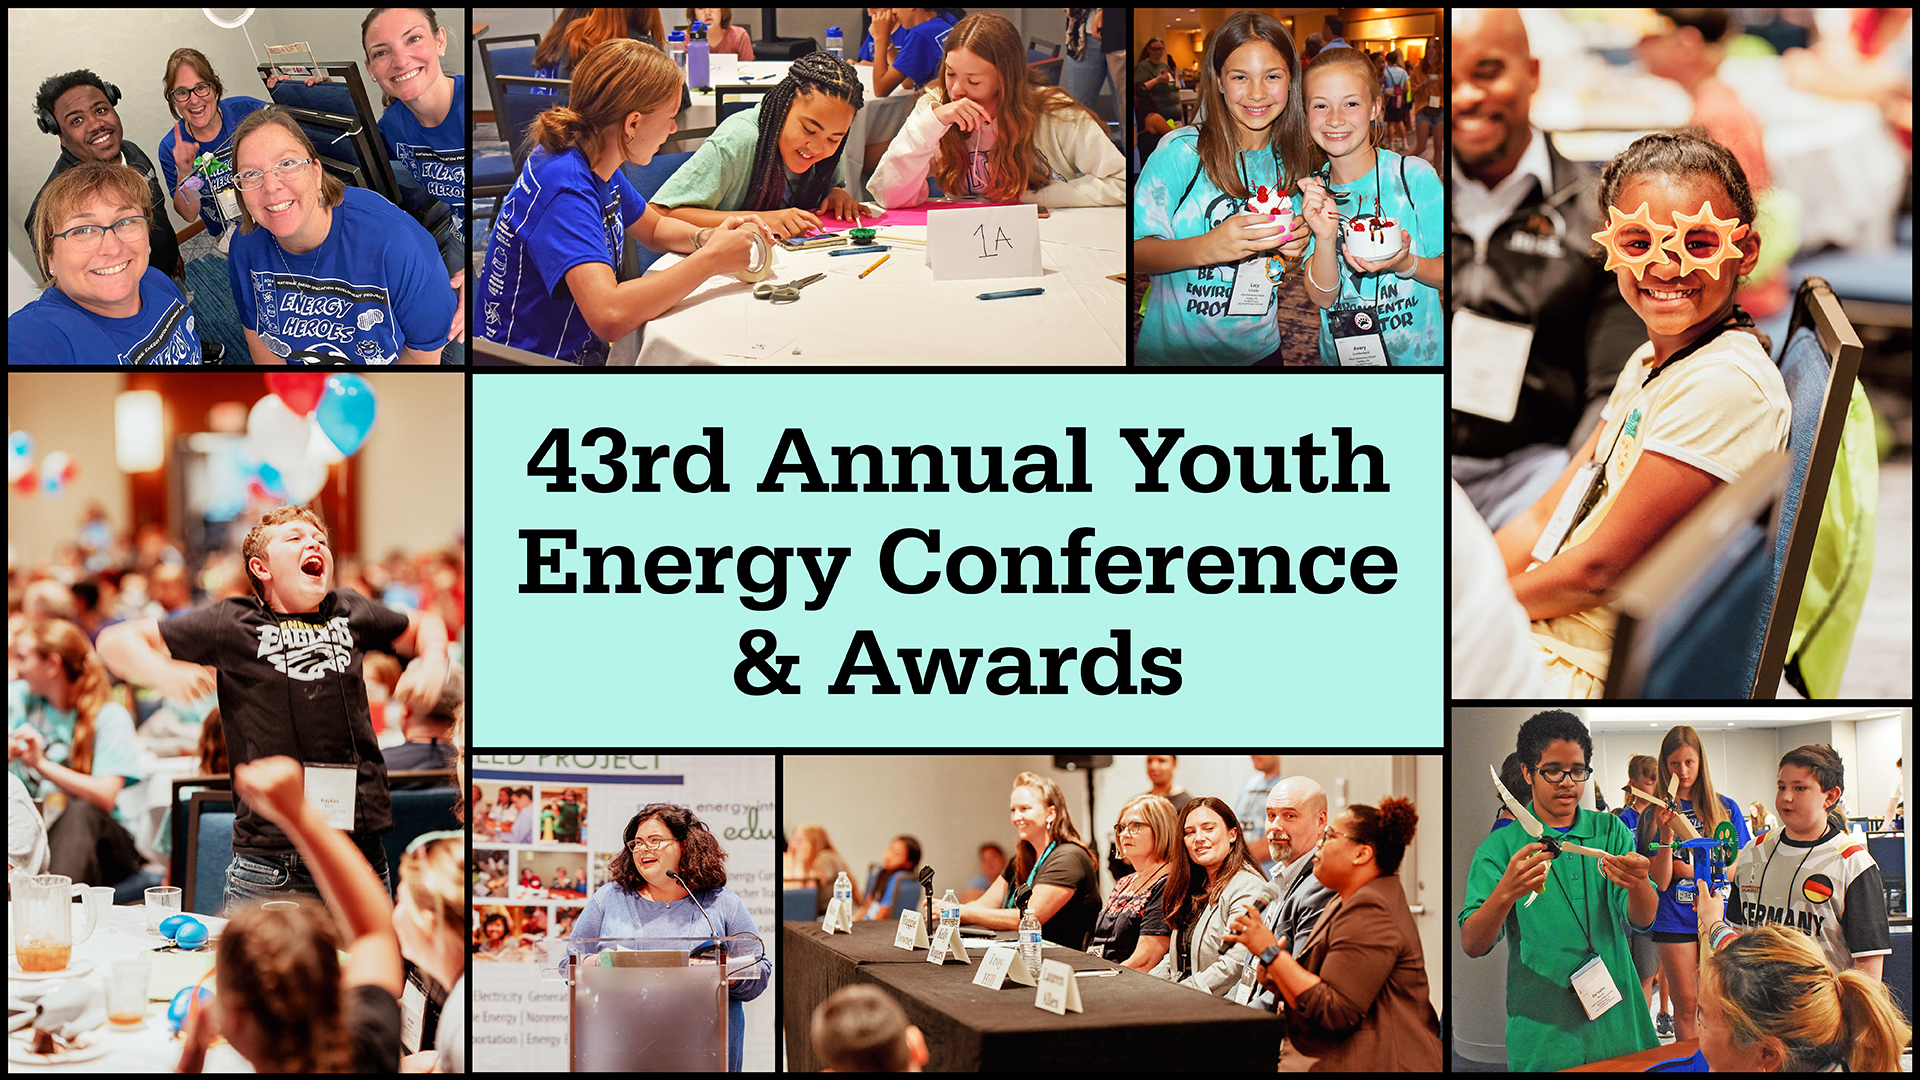 Collage of student images from the 43rd annual youth energy conference and awards